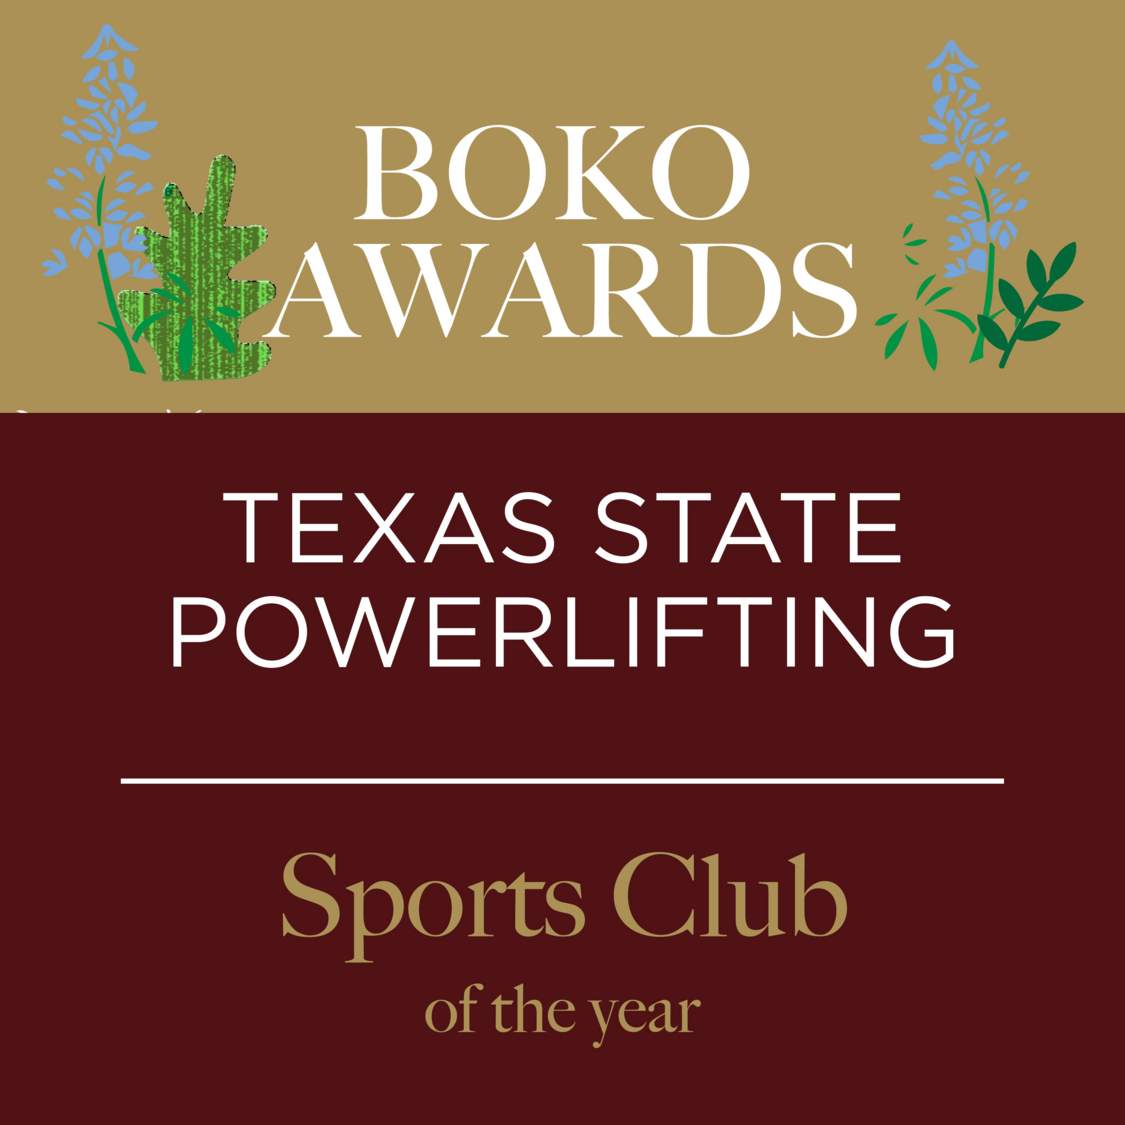 Picture of text displaying that Texas State Powerlifting won the Sports Club of the Year award.